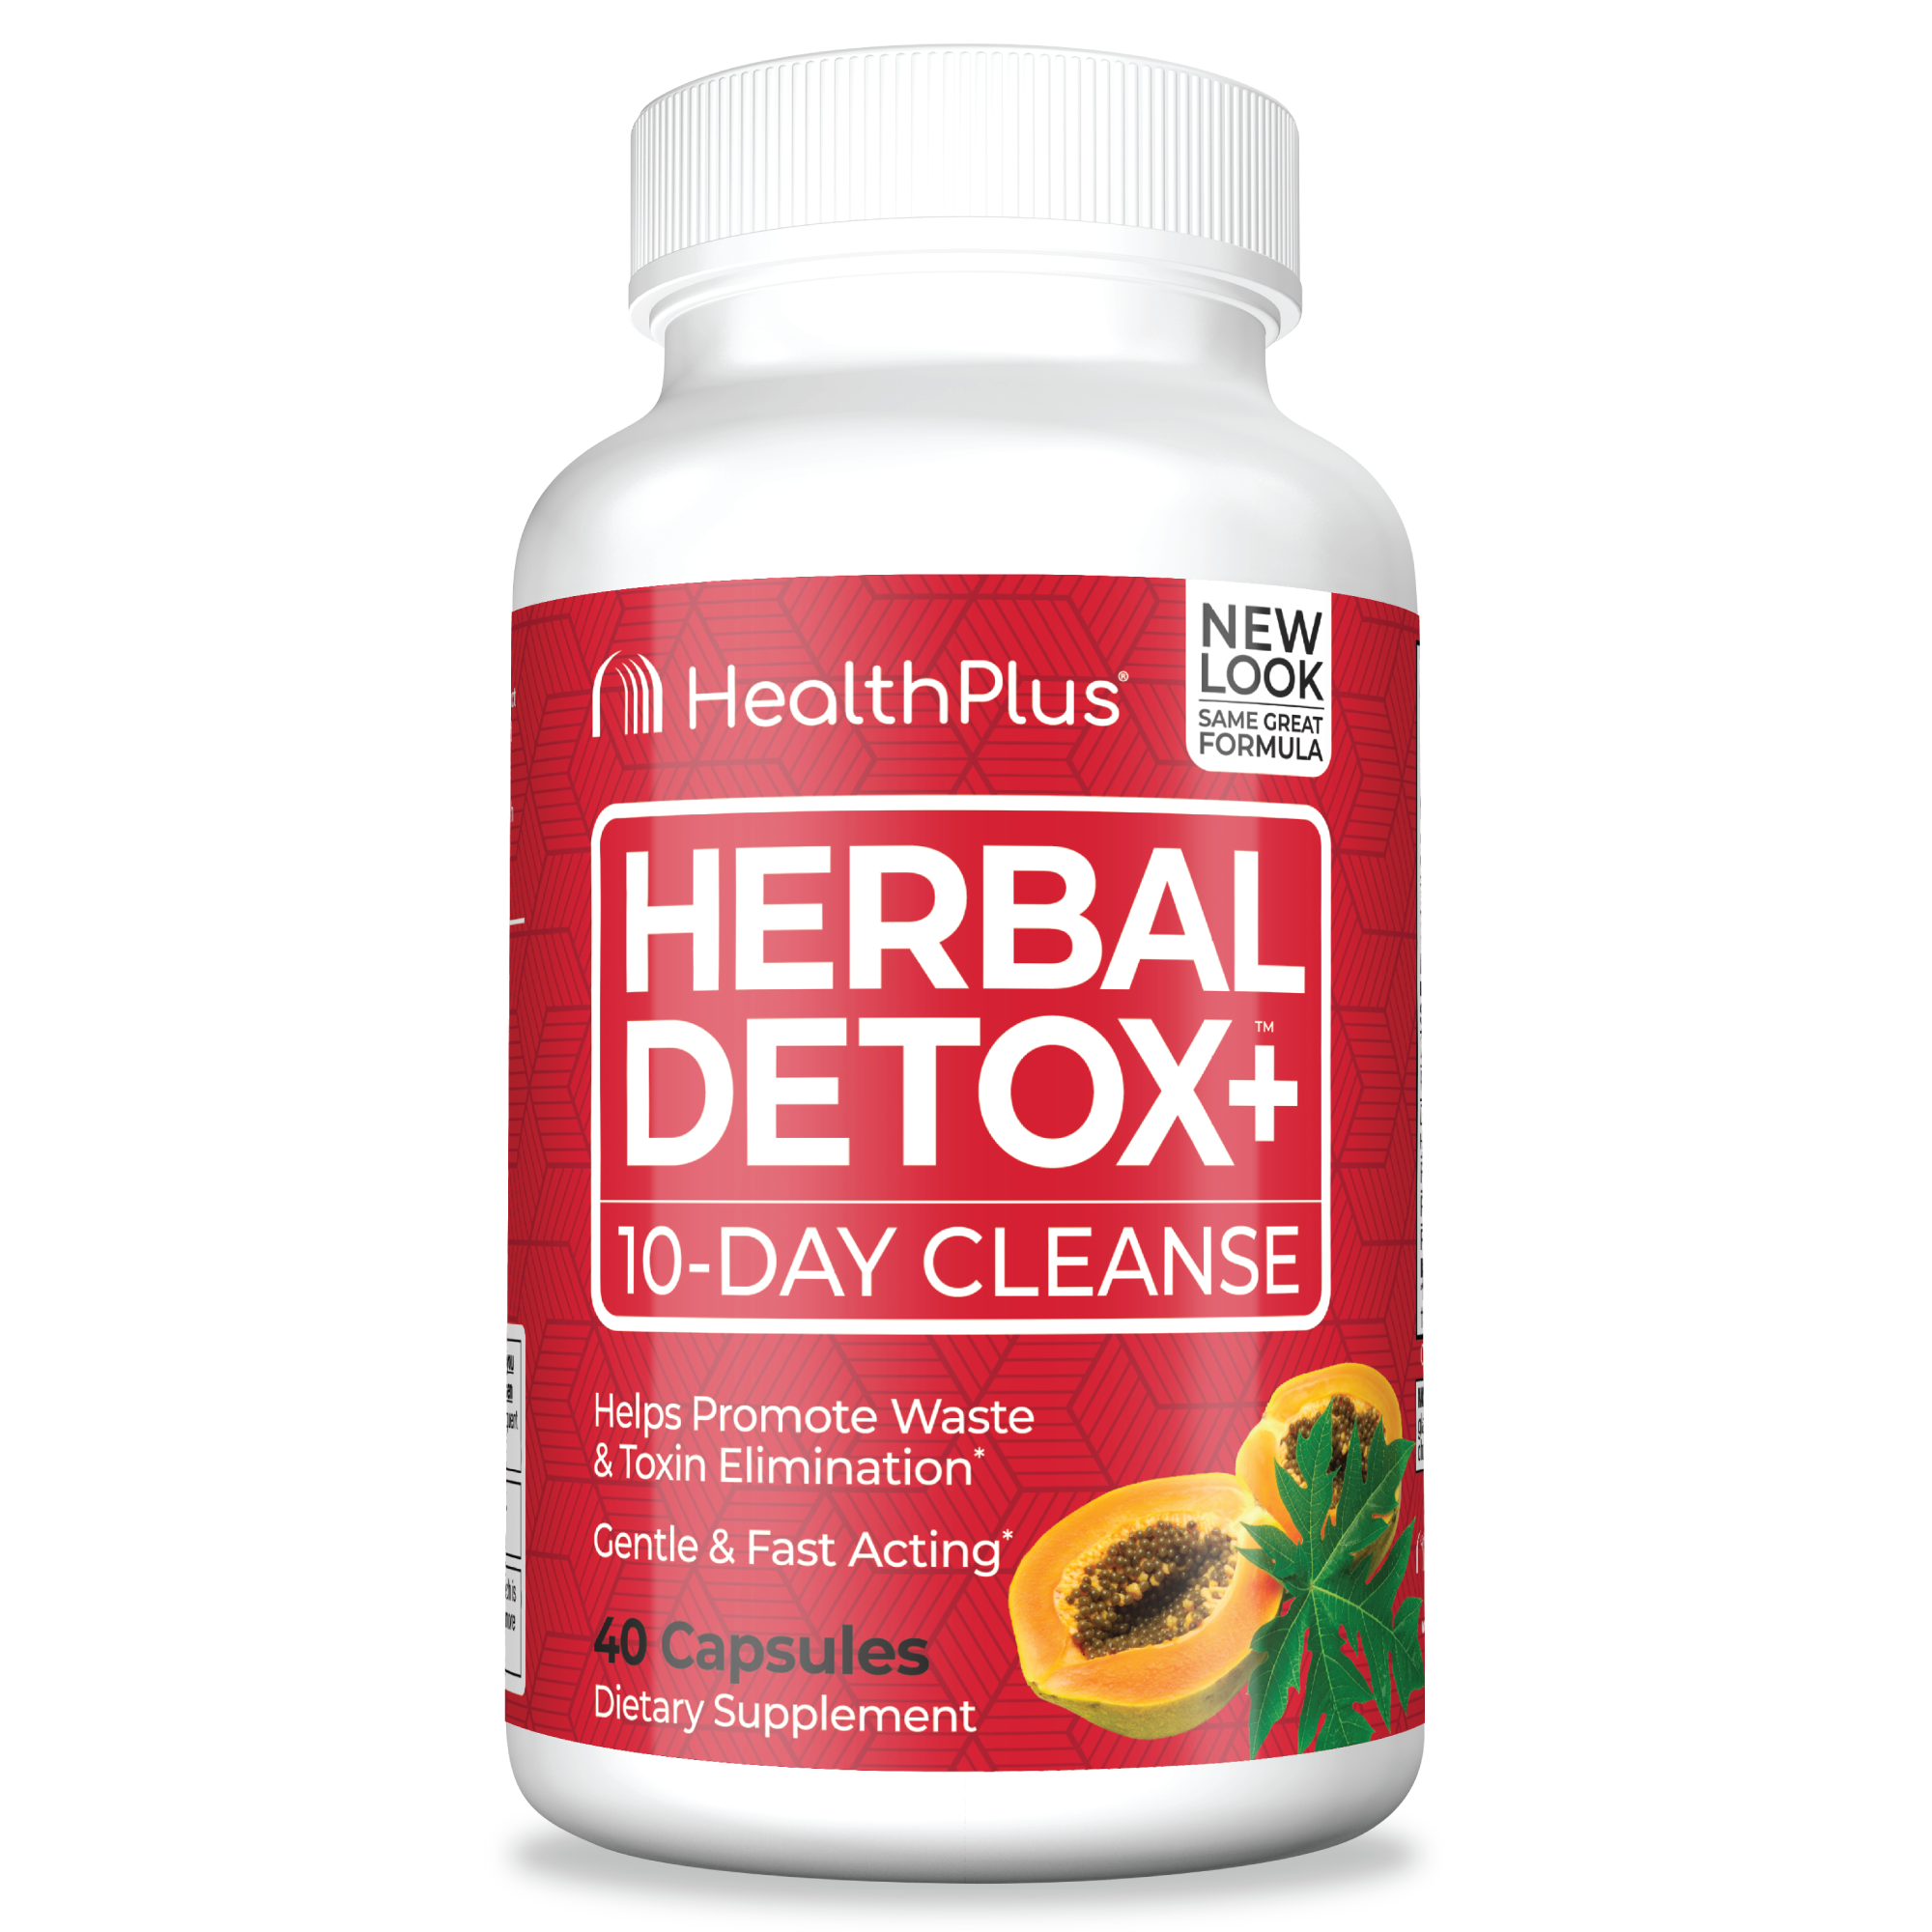 Herbal Detox 10-day Cleanse Product Image